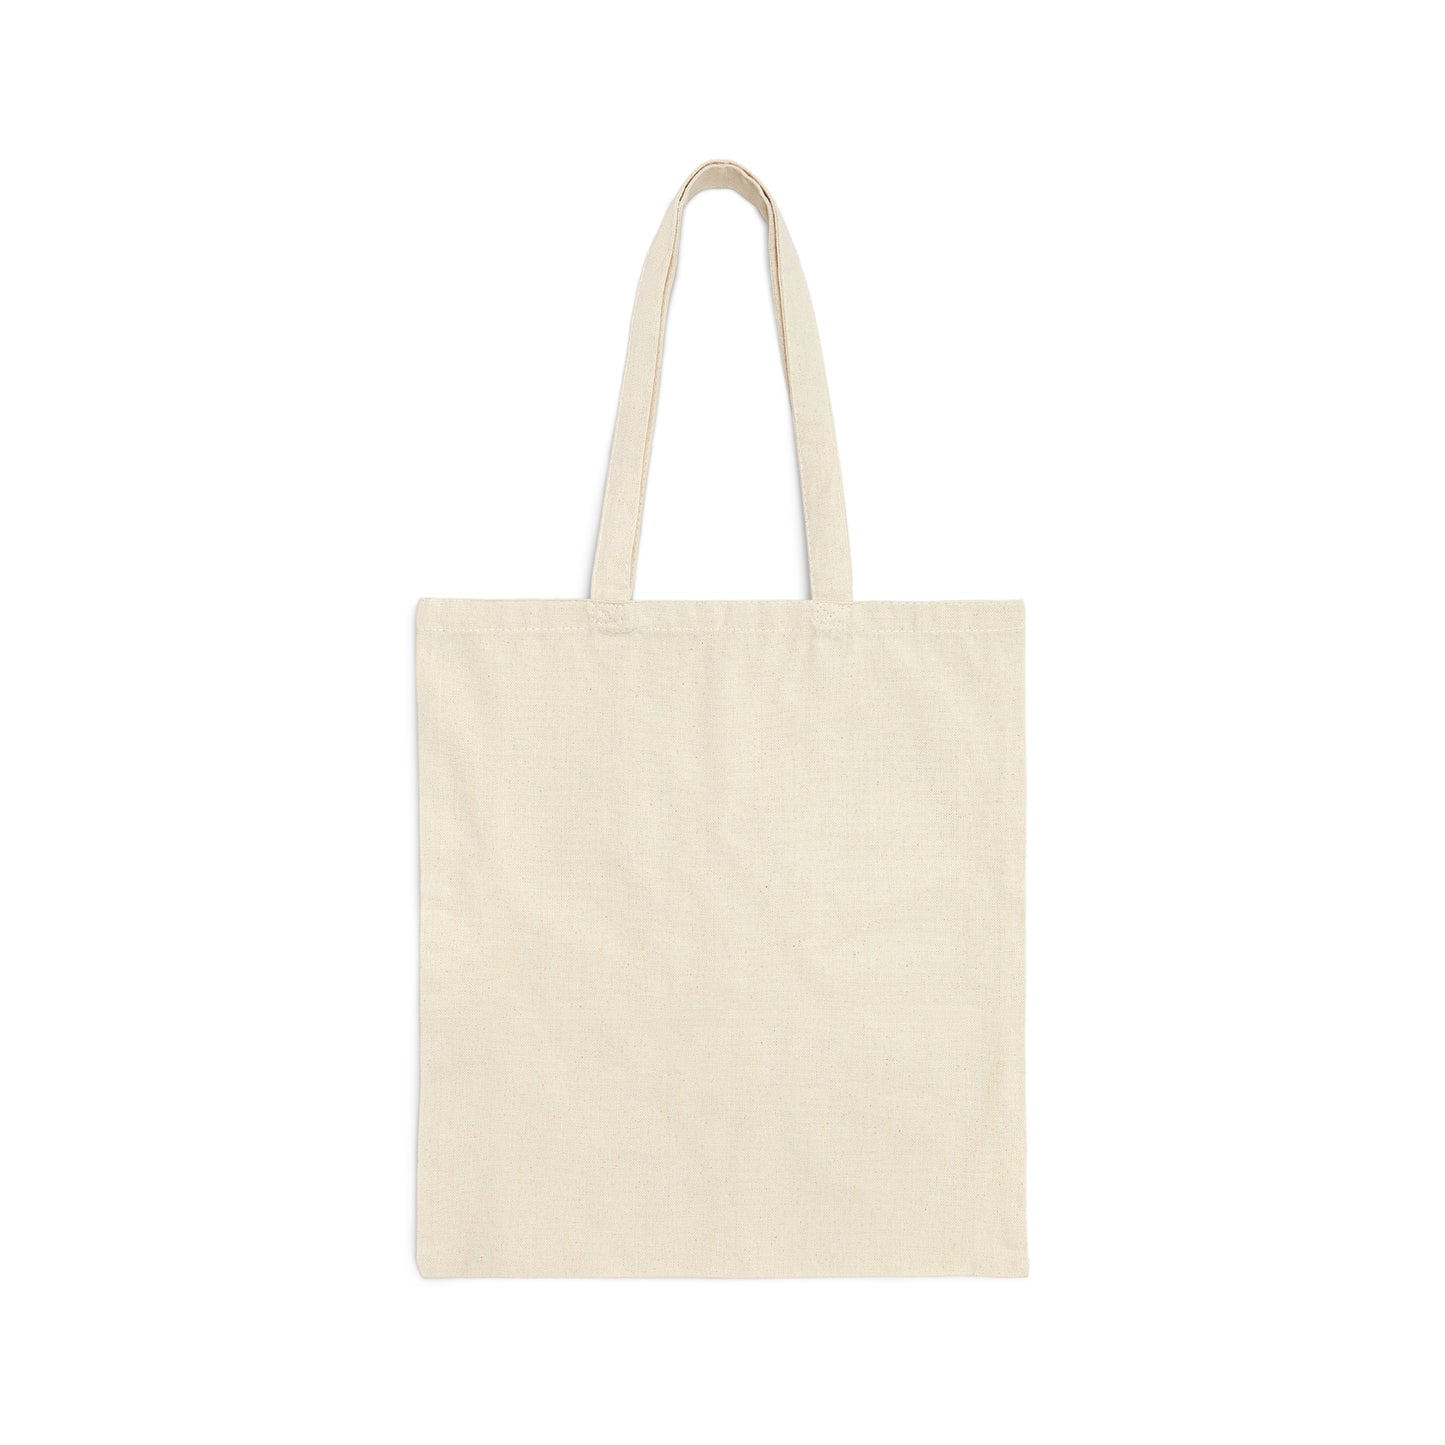 I am Ready for my Third Breakfast Christmas Holidays Canvas Shopping Cotton Tote Bag